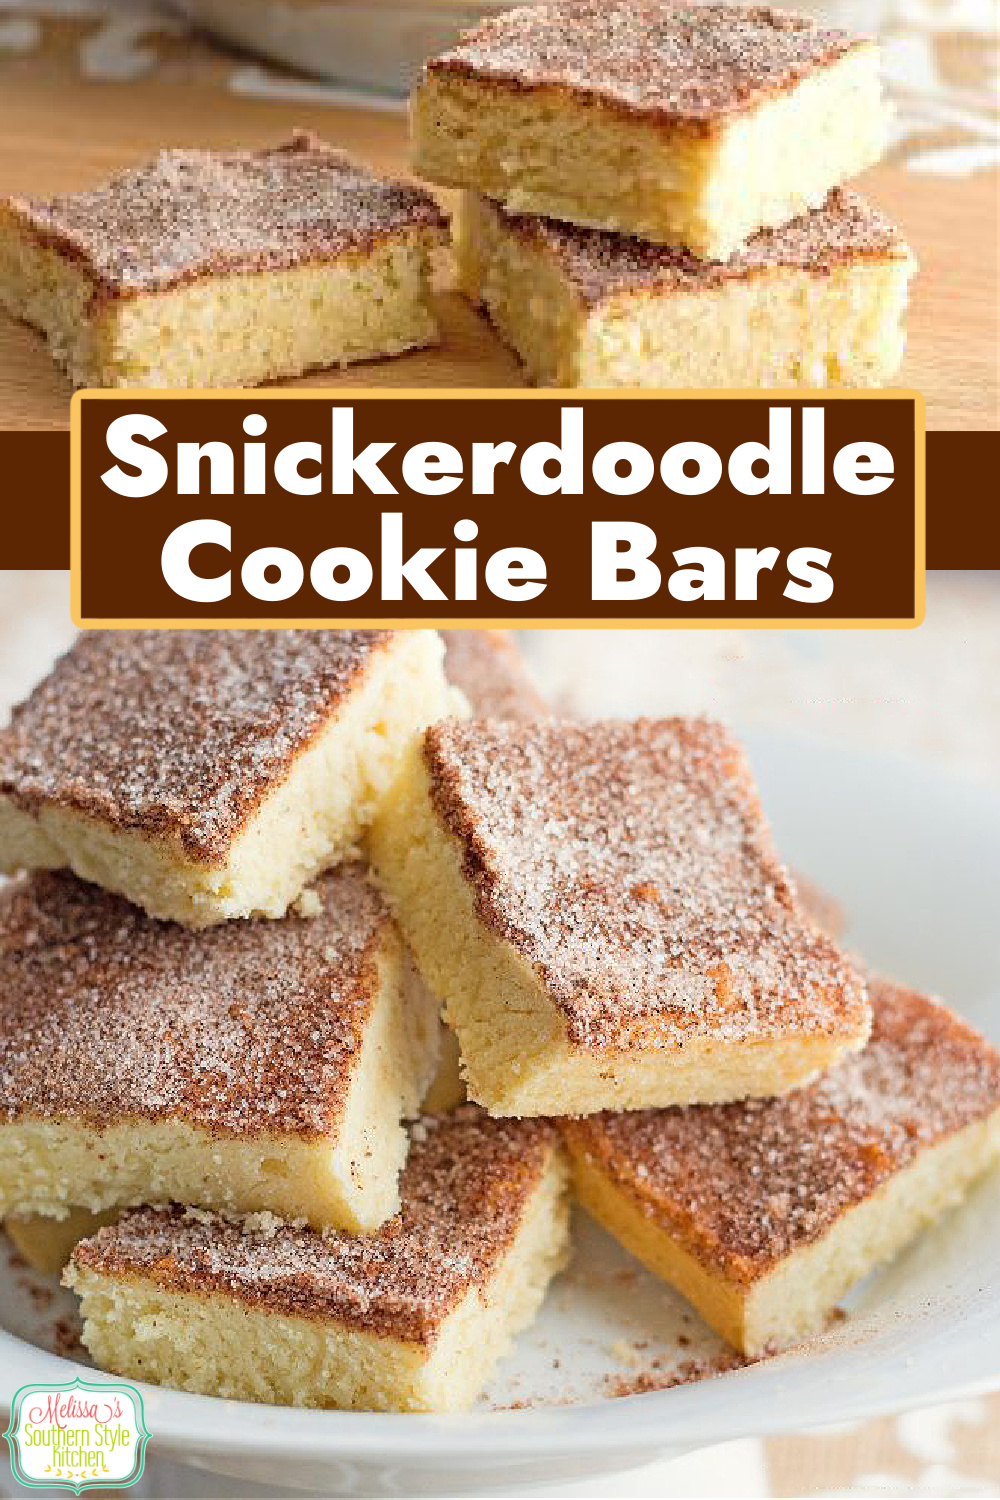 These sweet Snickerdoodle Cookie Bars will melt in your mouth #snickerdoodles #snickerdoodlecookies #cookiebars #snickerdoodlecookiebars #cookies #snickerdoodles #cookierecipes #fallbaking #holidaybaking #thanksgivingdesserts via @melissasssk